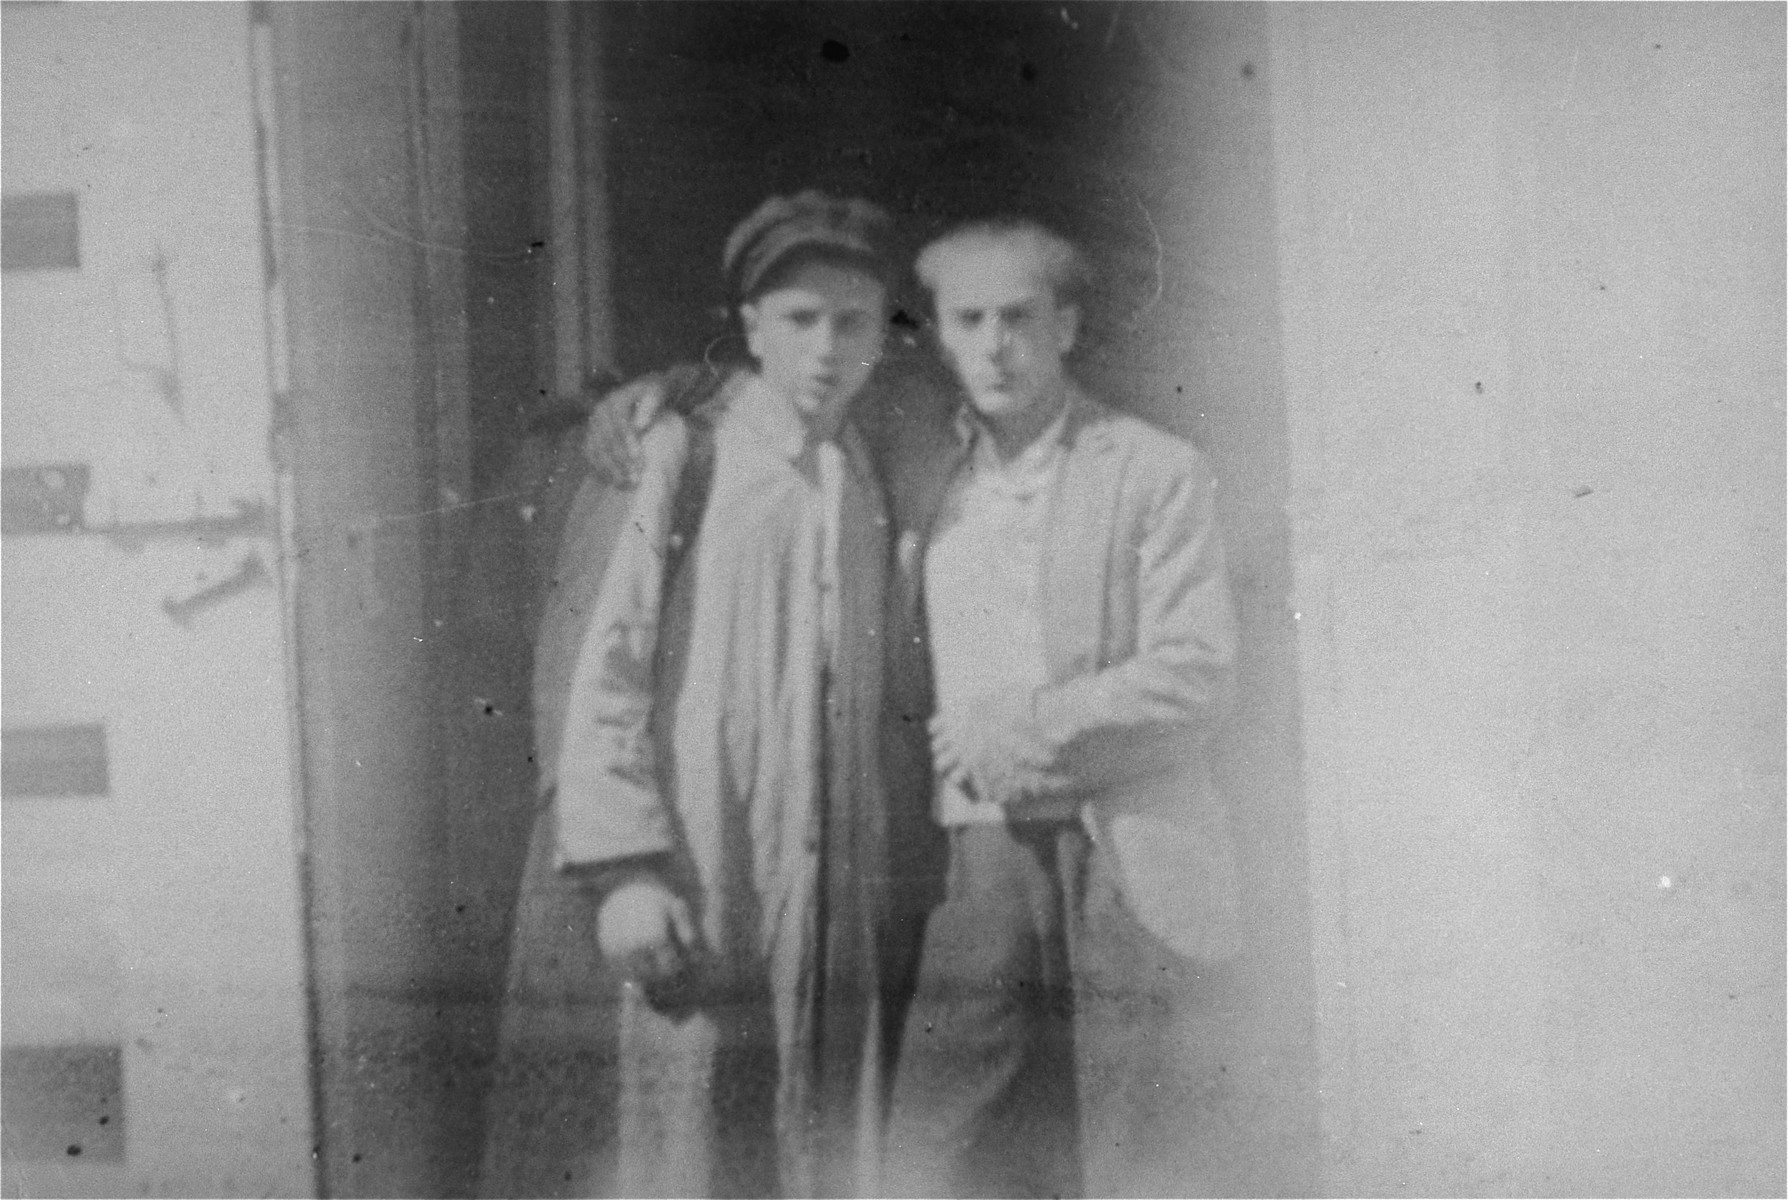 Two Jewish youth who are posing as Poles stand outside in a doorway on the Aryan side of Warsaw.

Pictured are Ignacy (Byczek) Milchberg (left) and Izaak (Zbyszek) Grynberg (right), two of a group of 20 Jewish children who were living in hiding on the Aryan side of Warsaw and supporting themselves by selling cigarettes in Three Crosses Square.